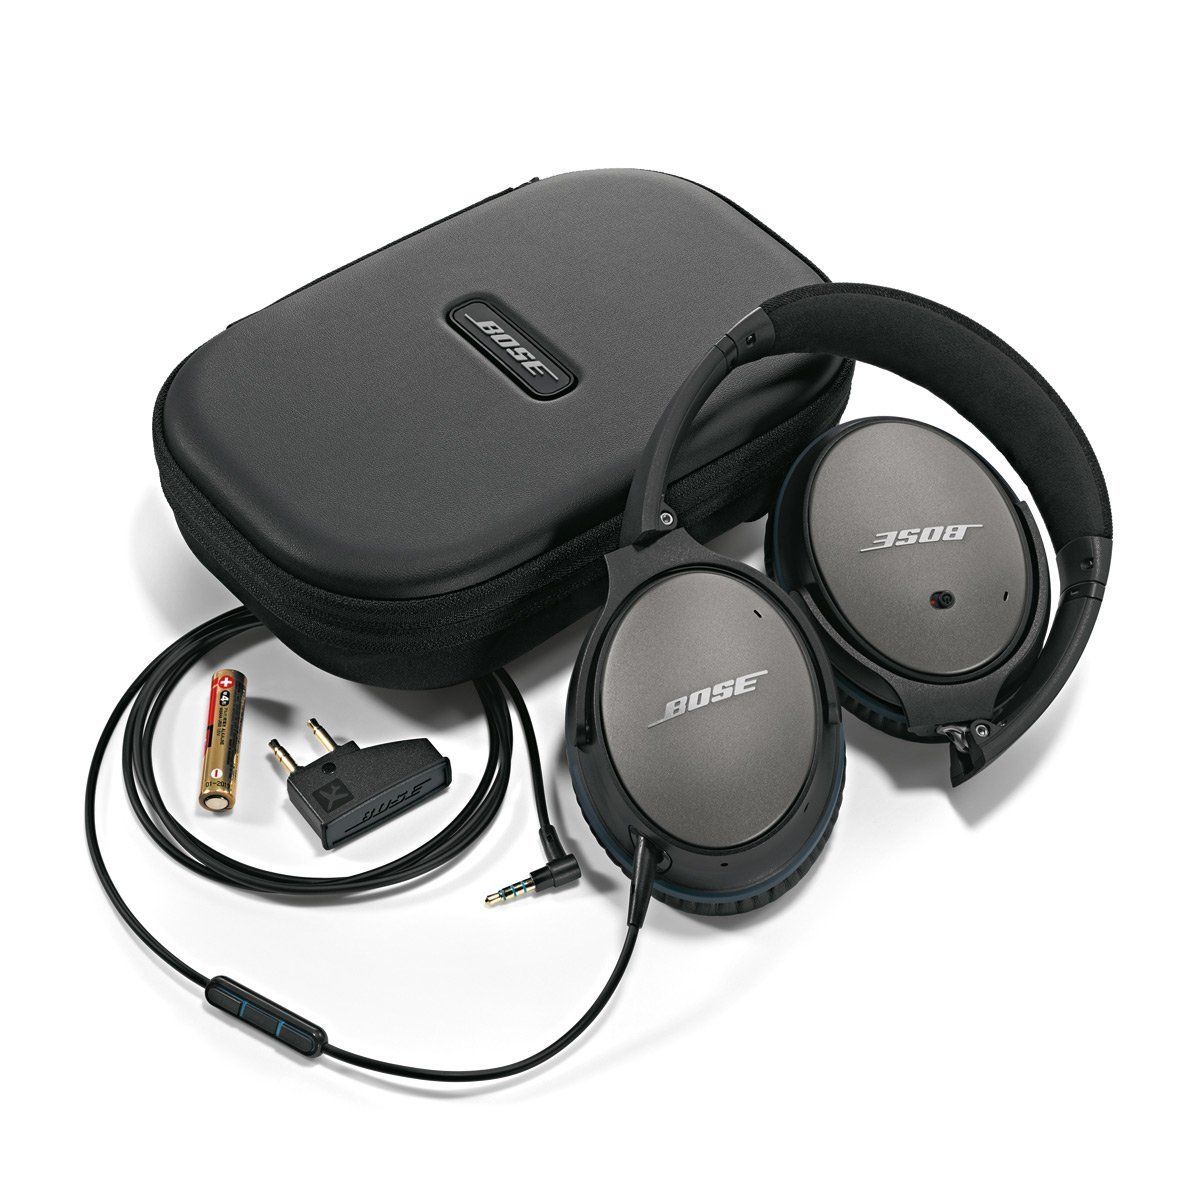 New Bose Quietcomfort 25 Acoustic Noise Cancelling Headphones For Android Wired Avallax